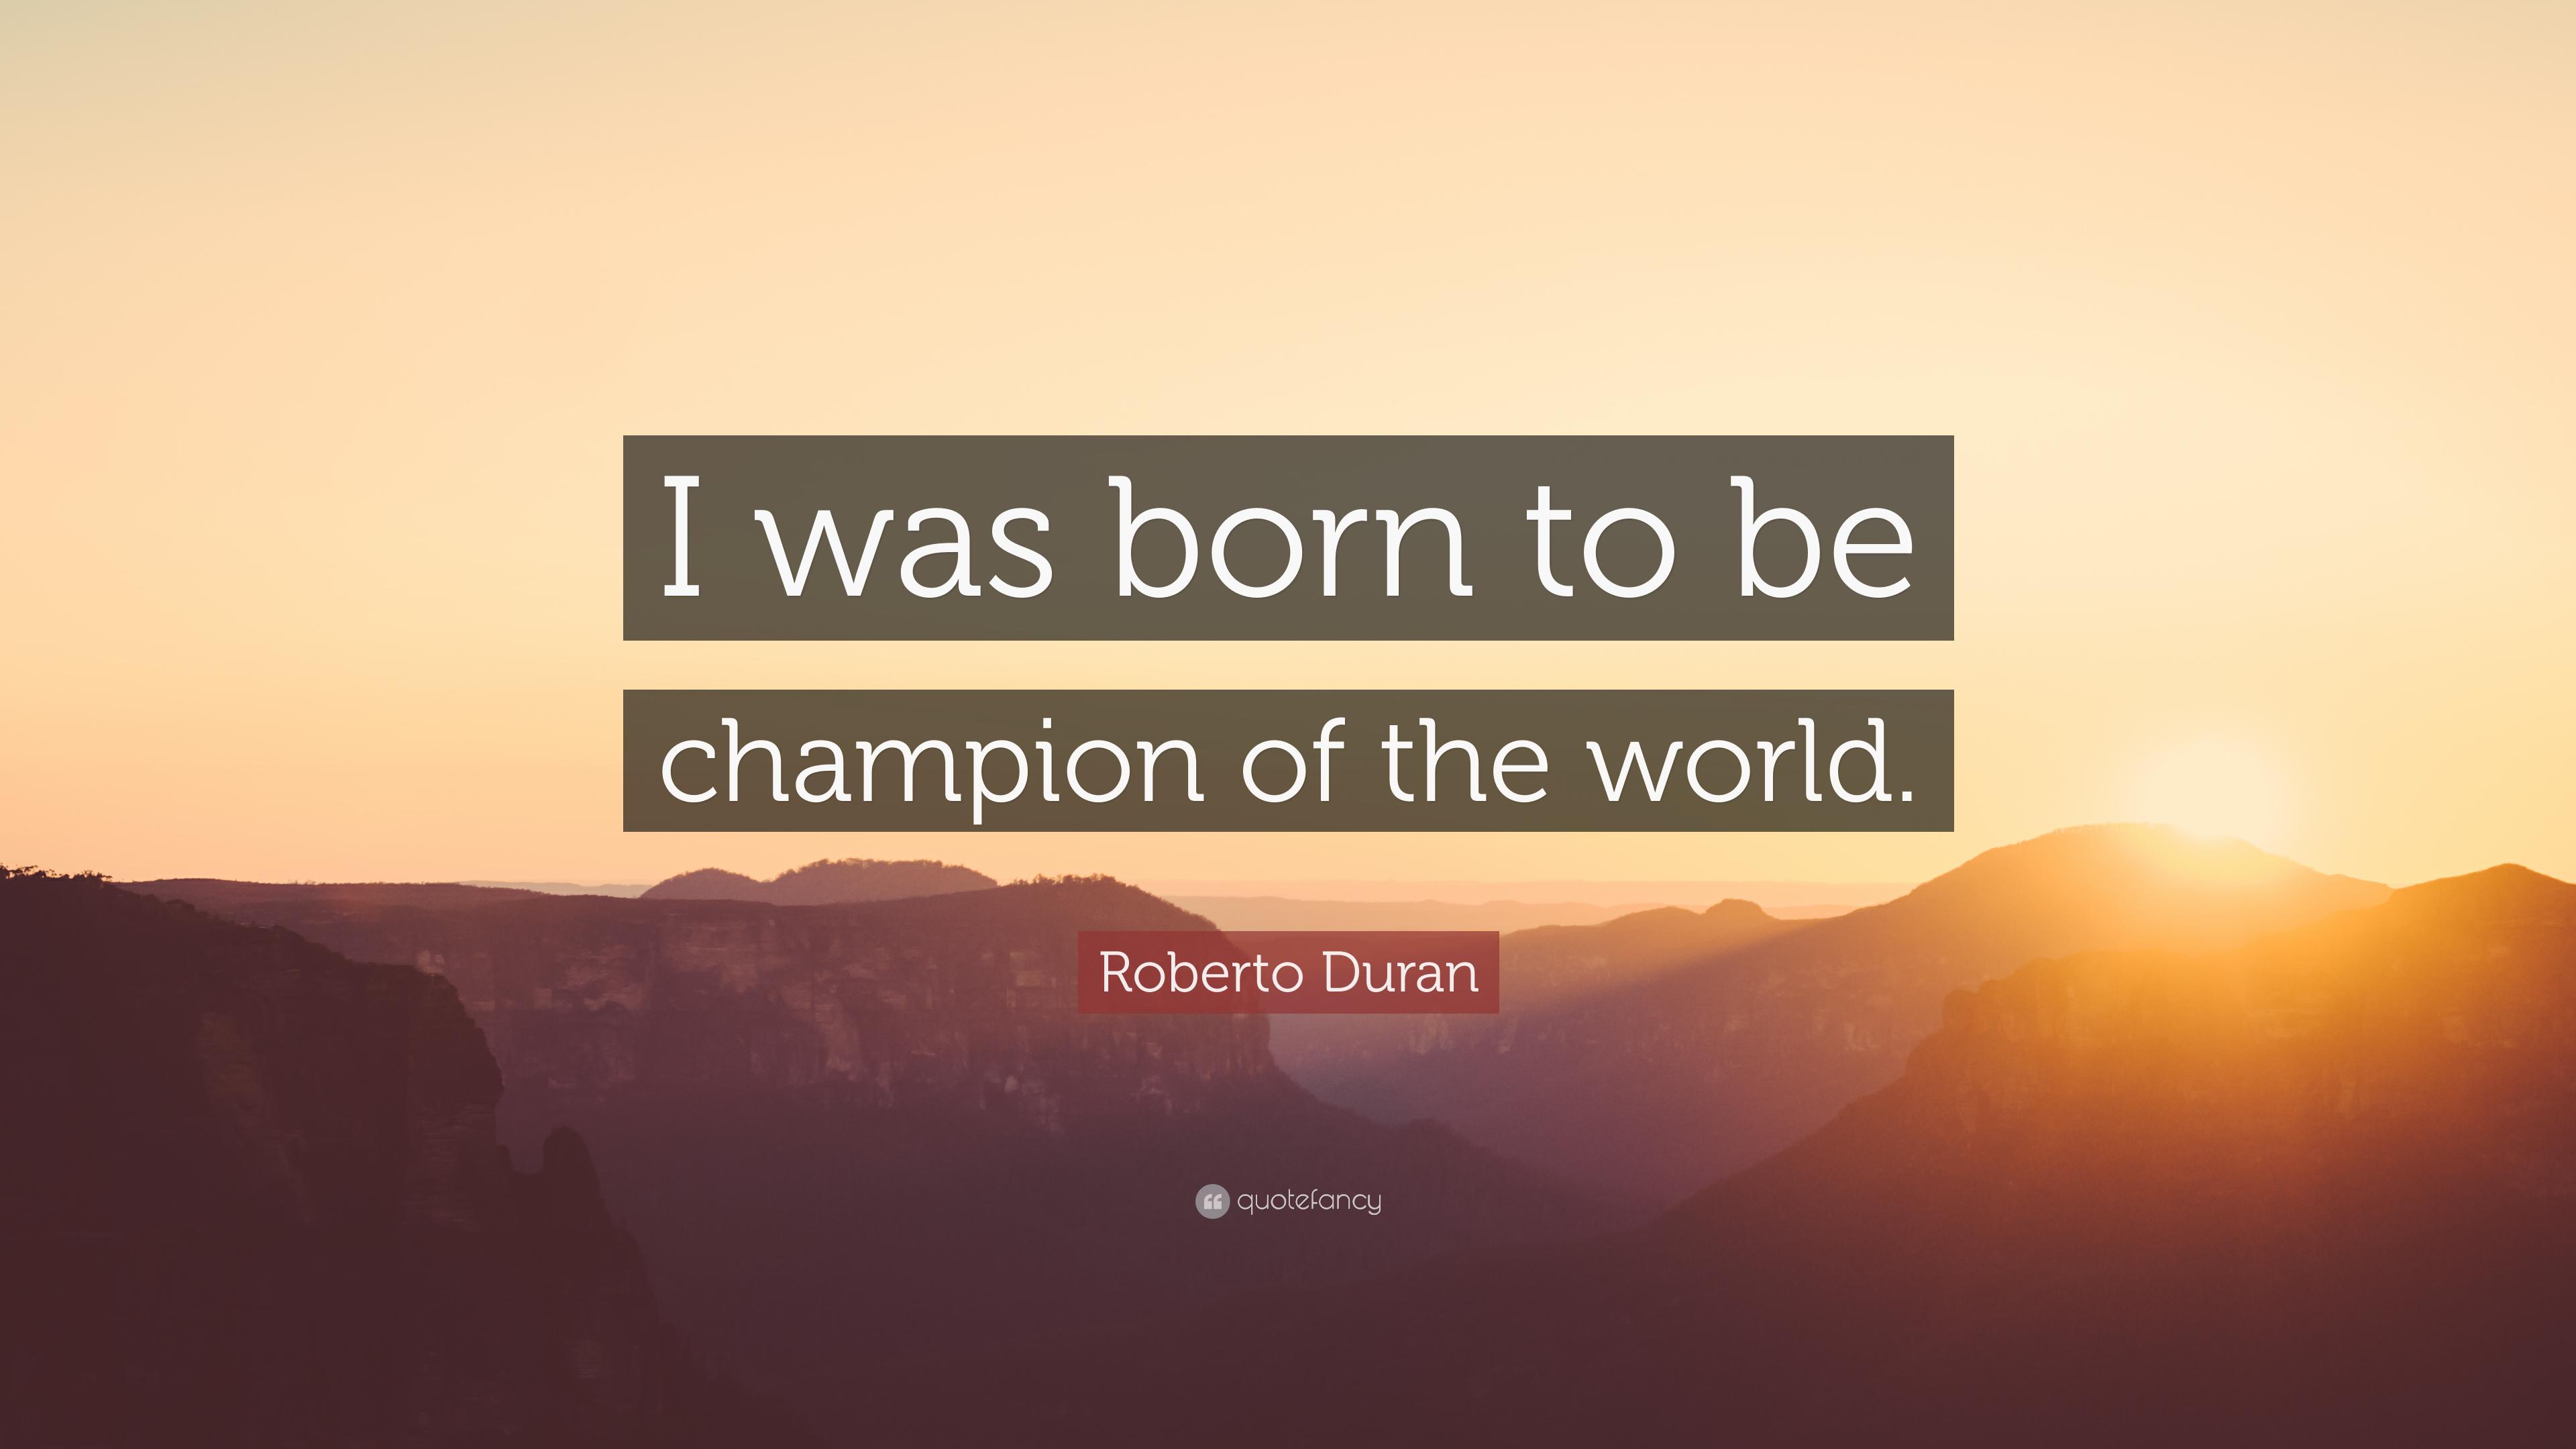 Roberto Duran Quote: “I was born to be champion of the world